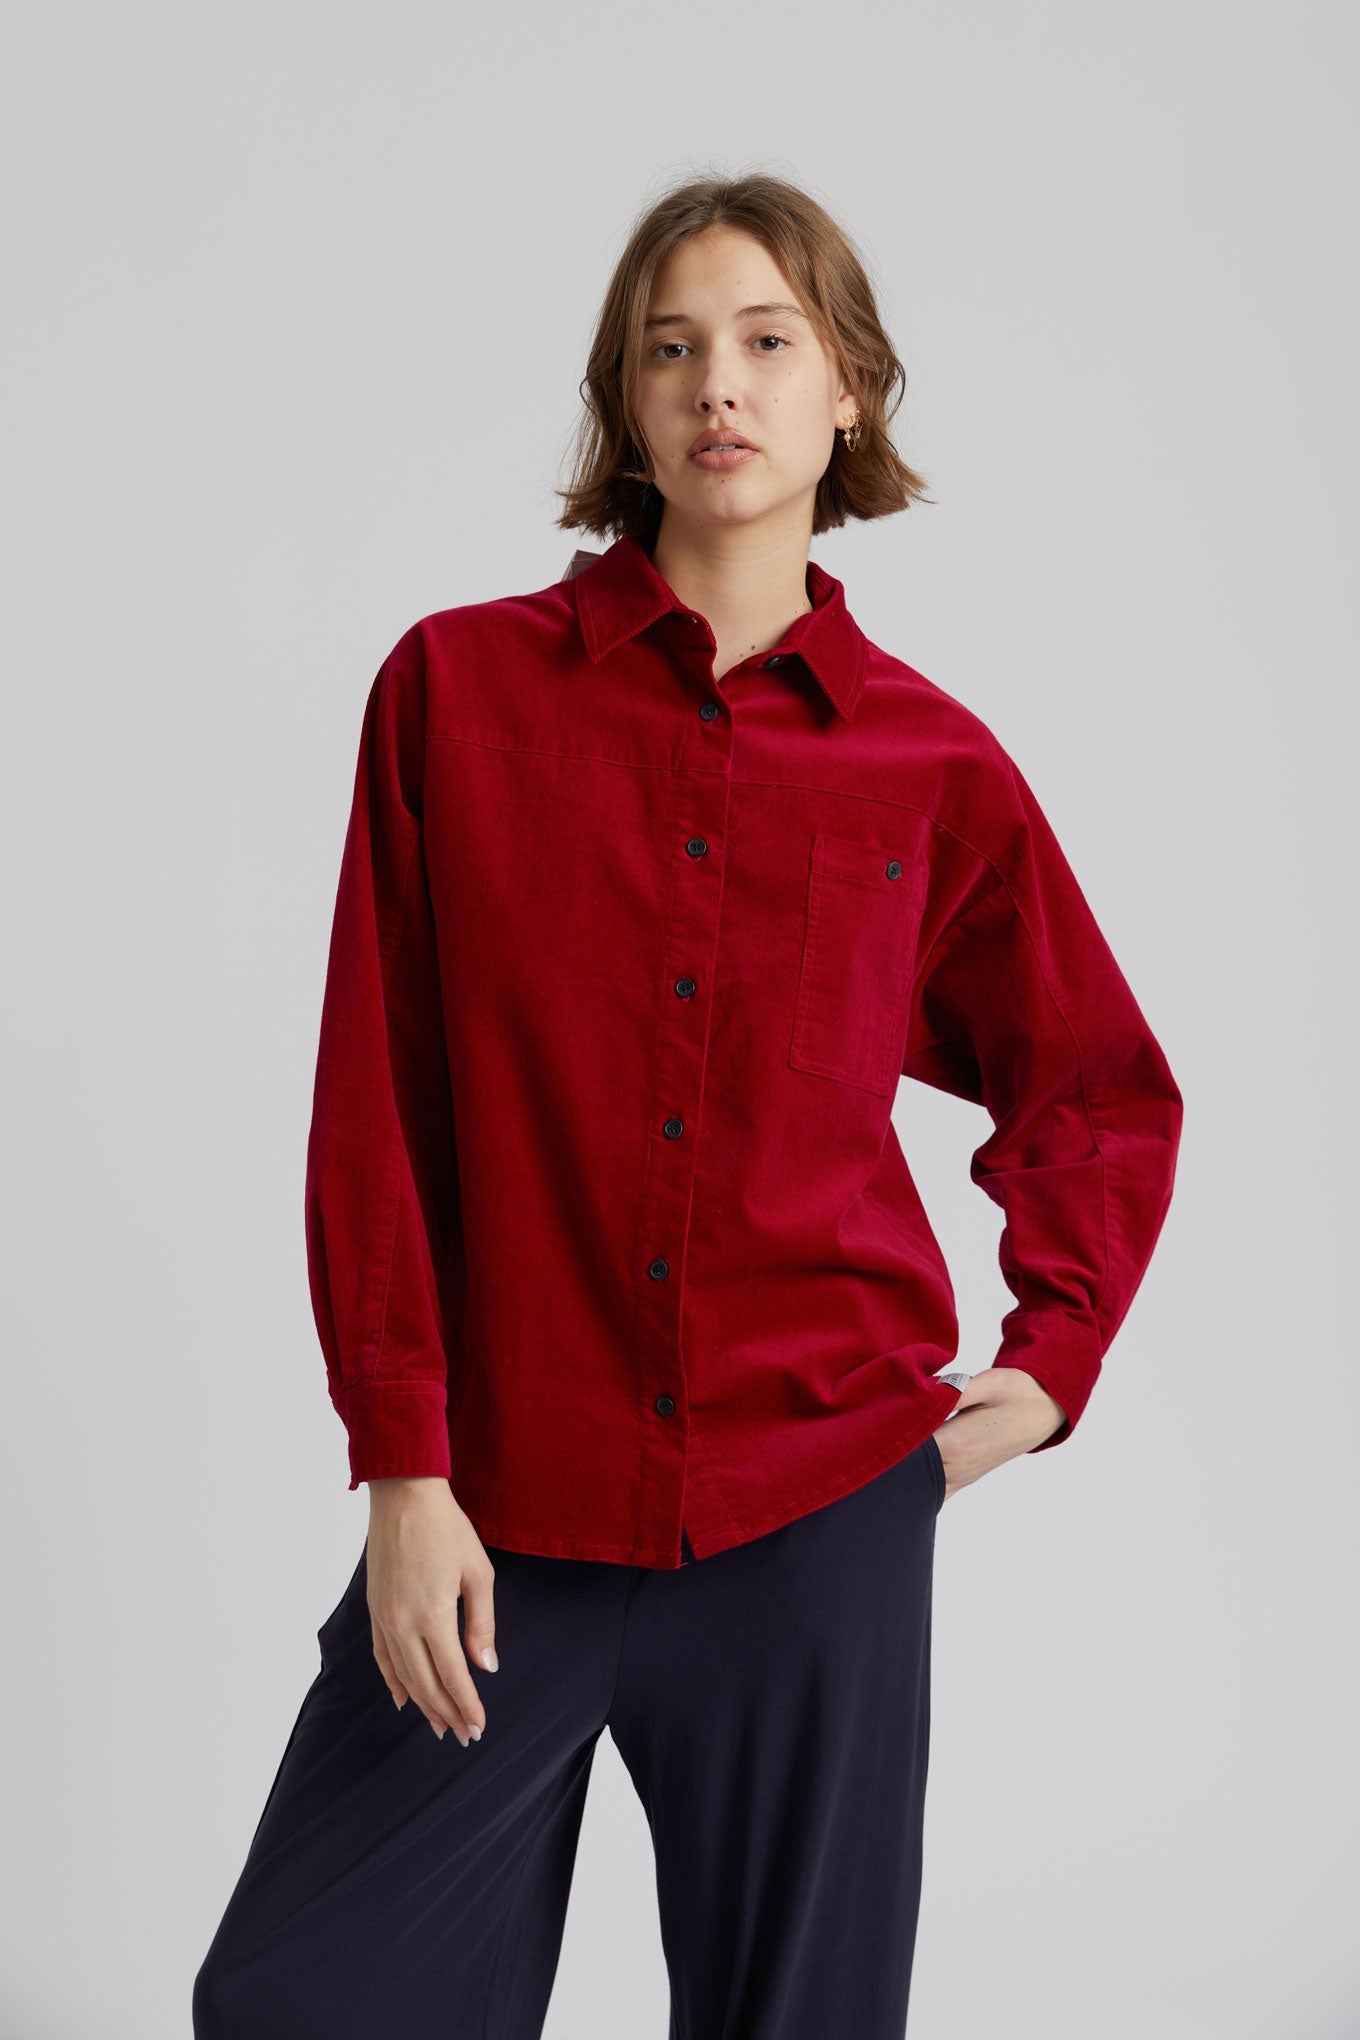 Red, long-sleeved corduroy shirt MIDNIGHT made of organic cotton by Komodo